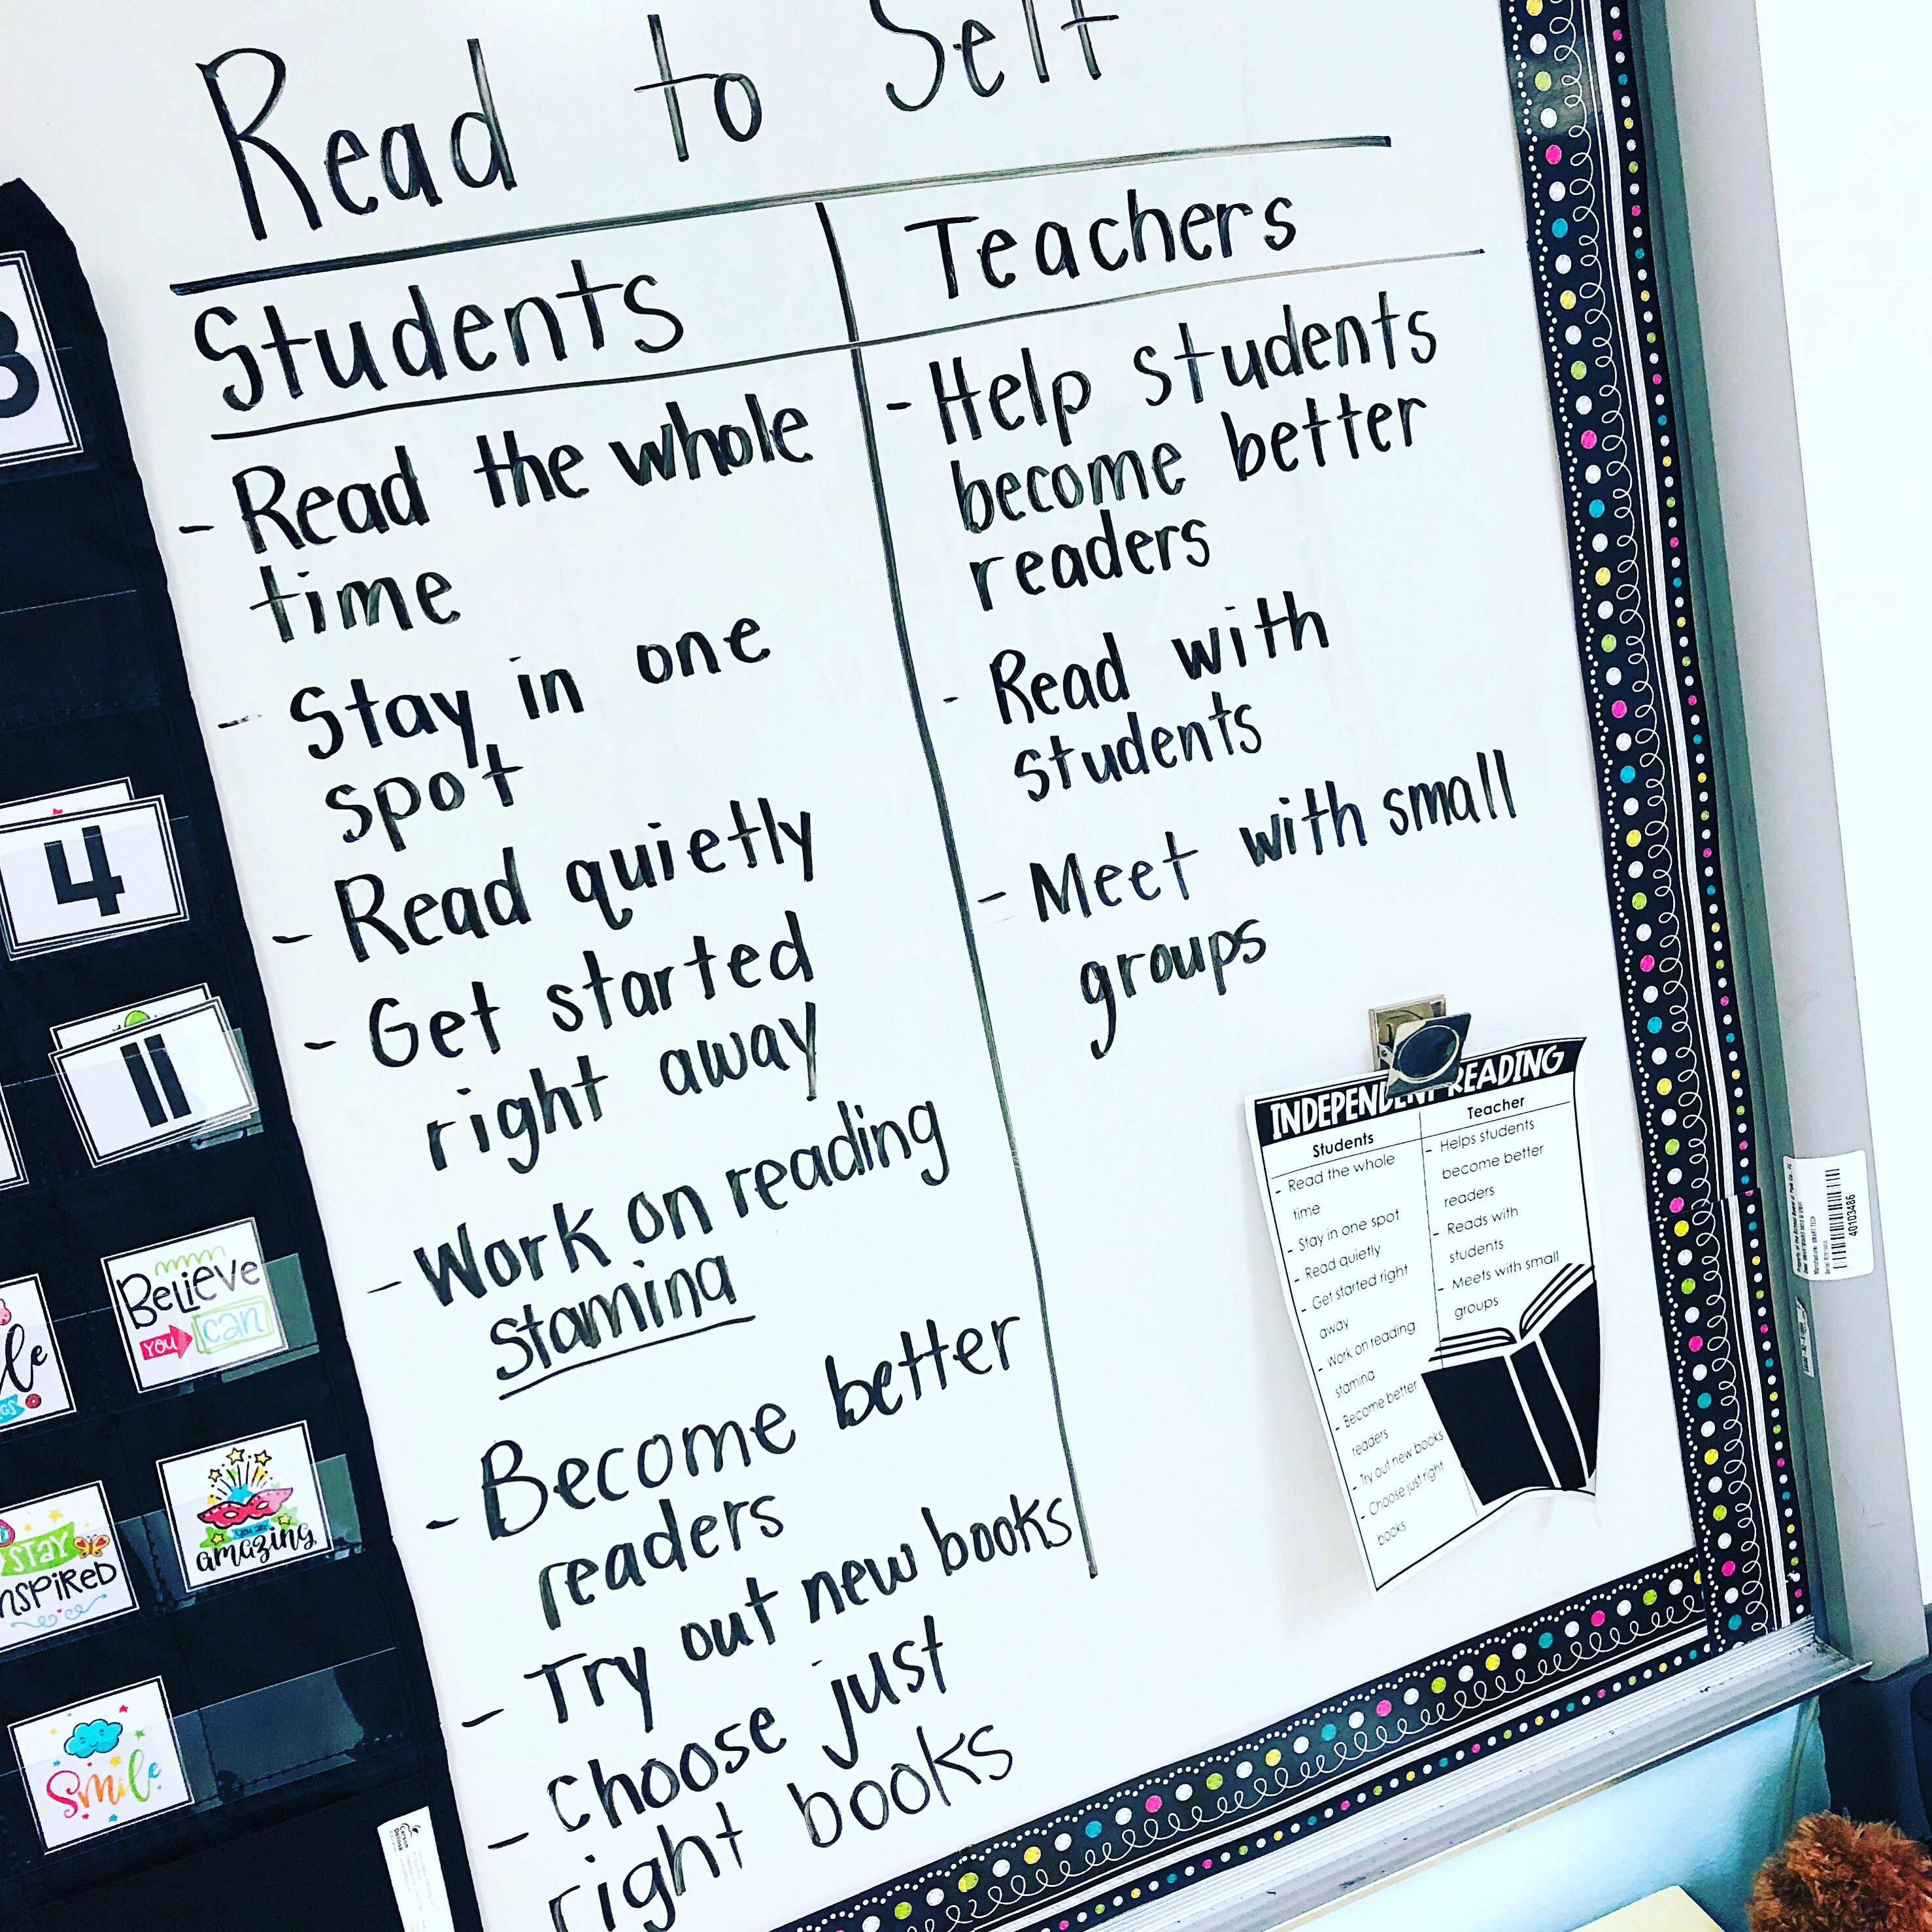 How to Teach Students to Build Reading Stamina